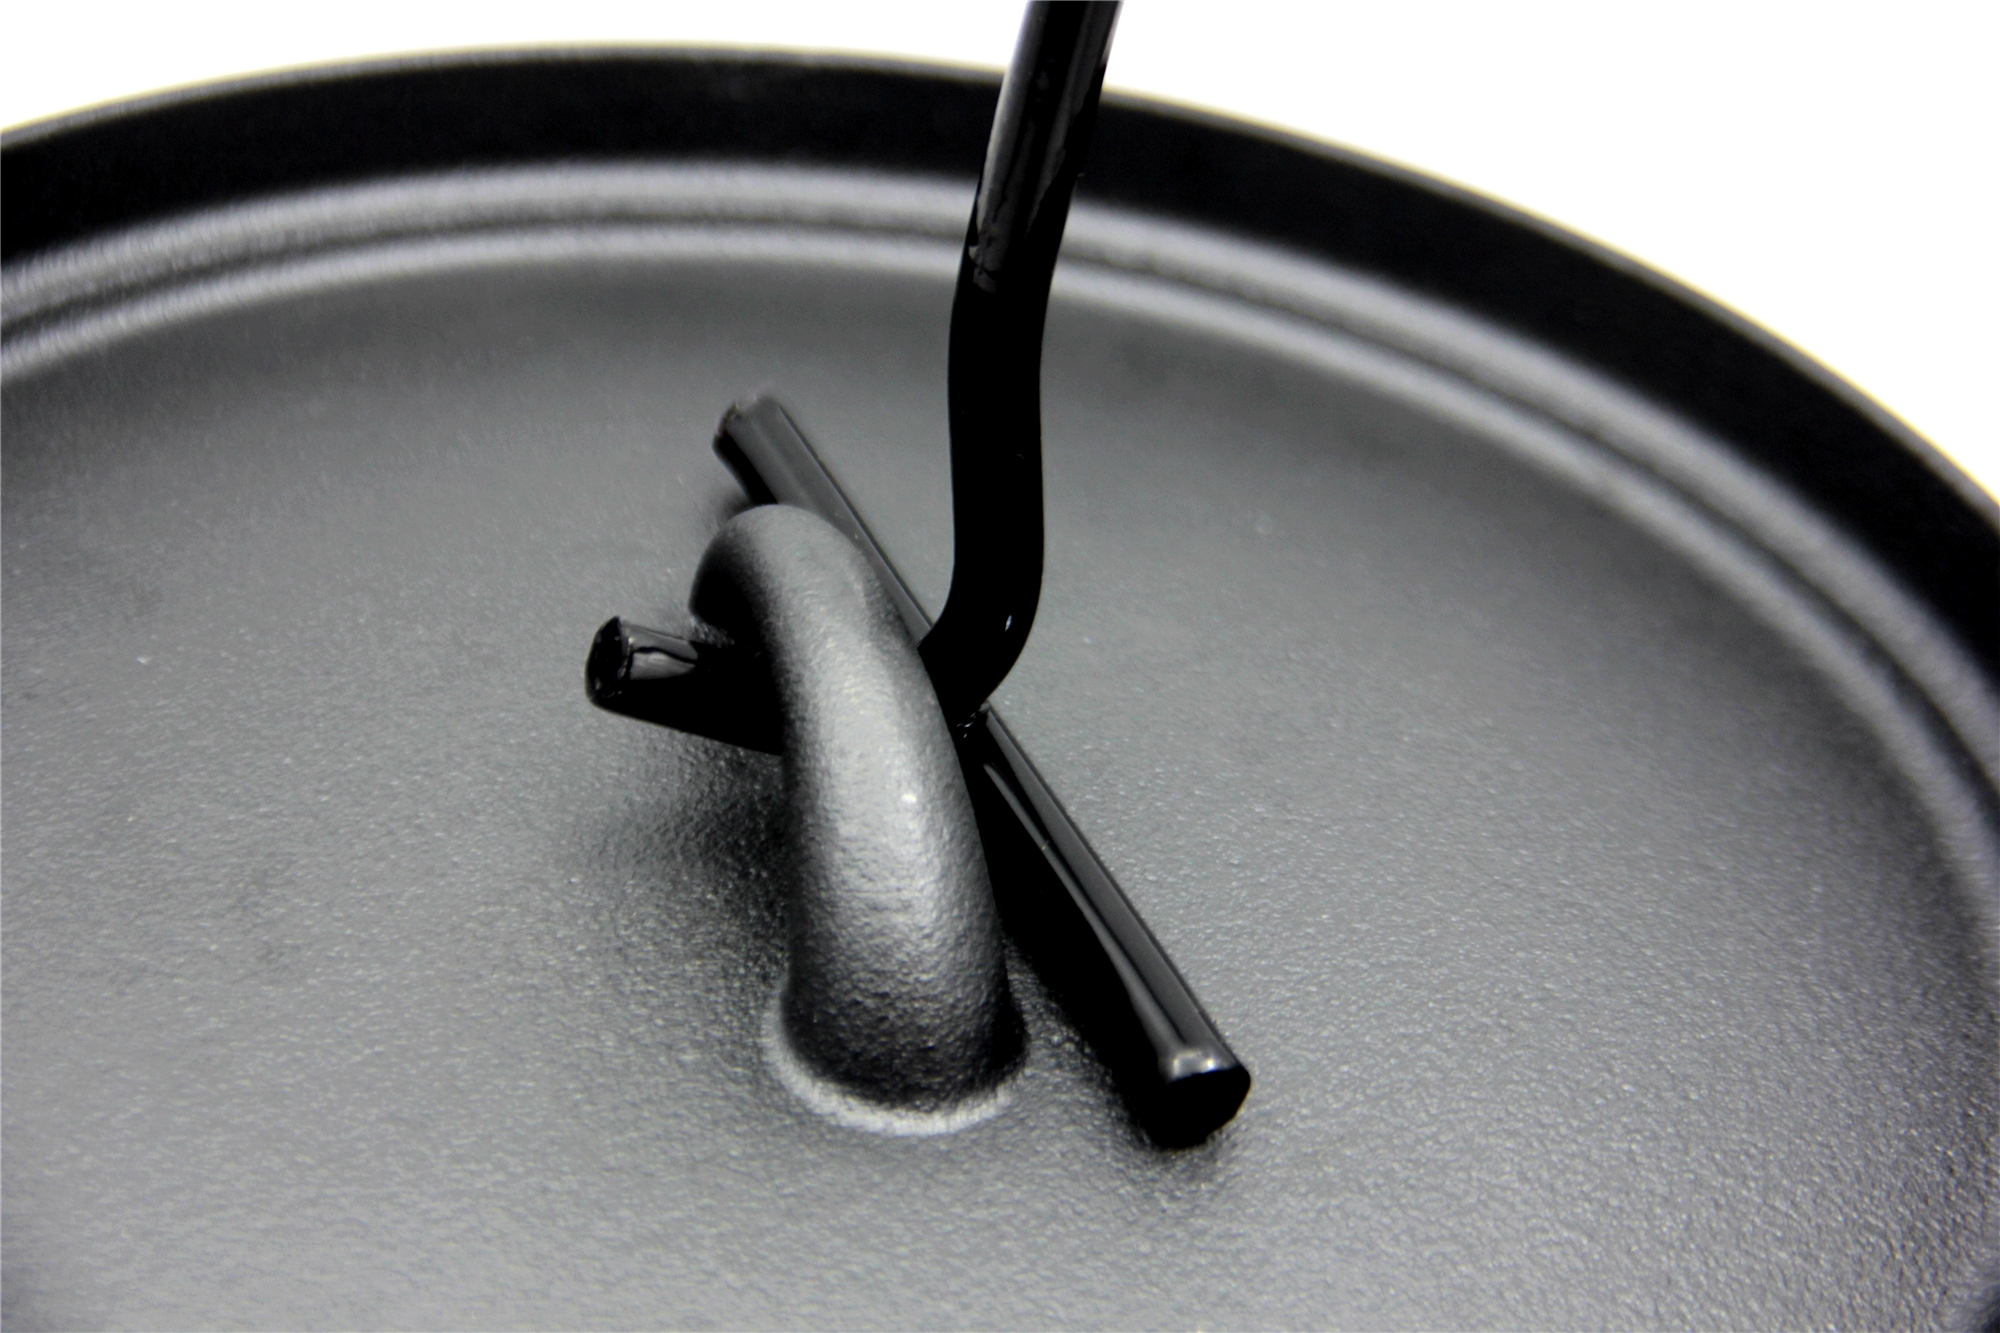 Durable Cast Iron Cookware Set for Cooking